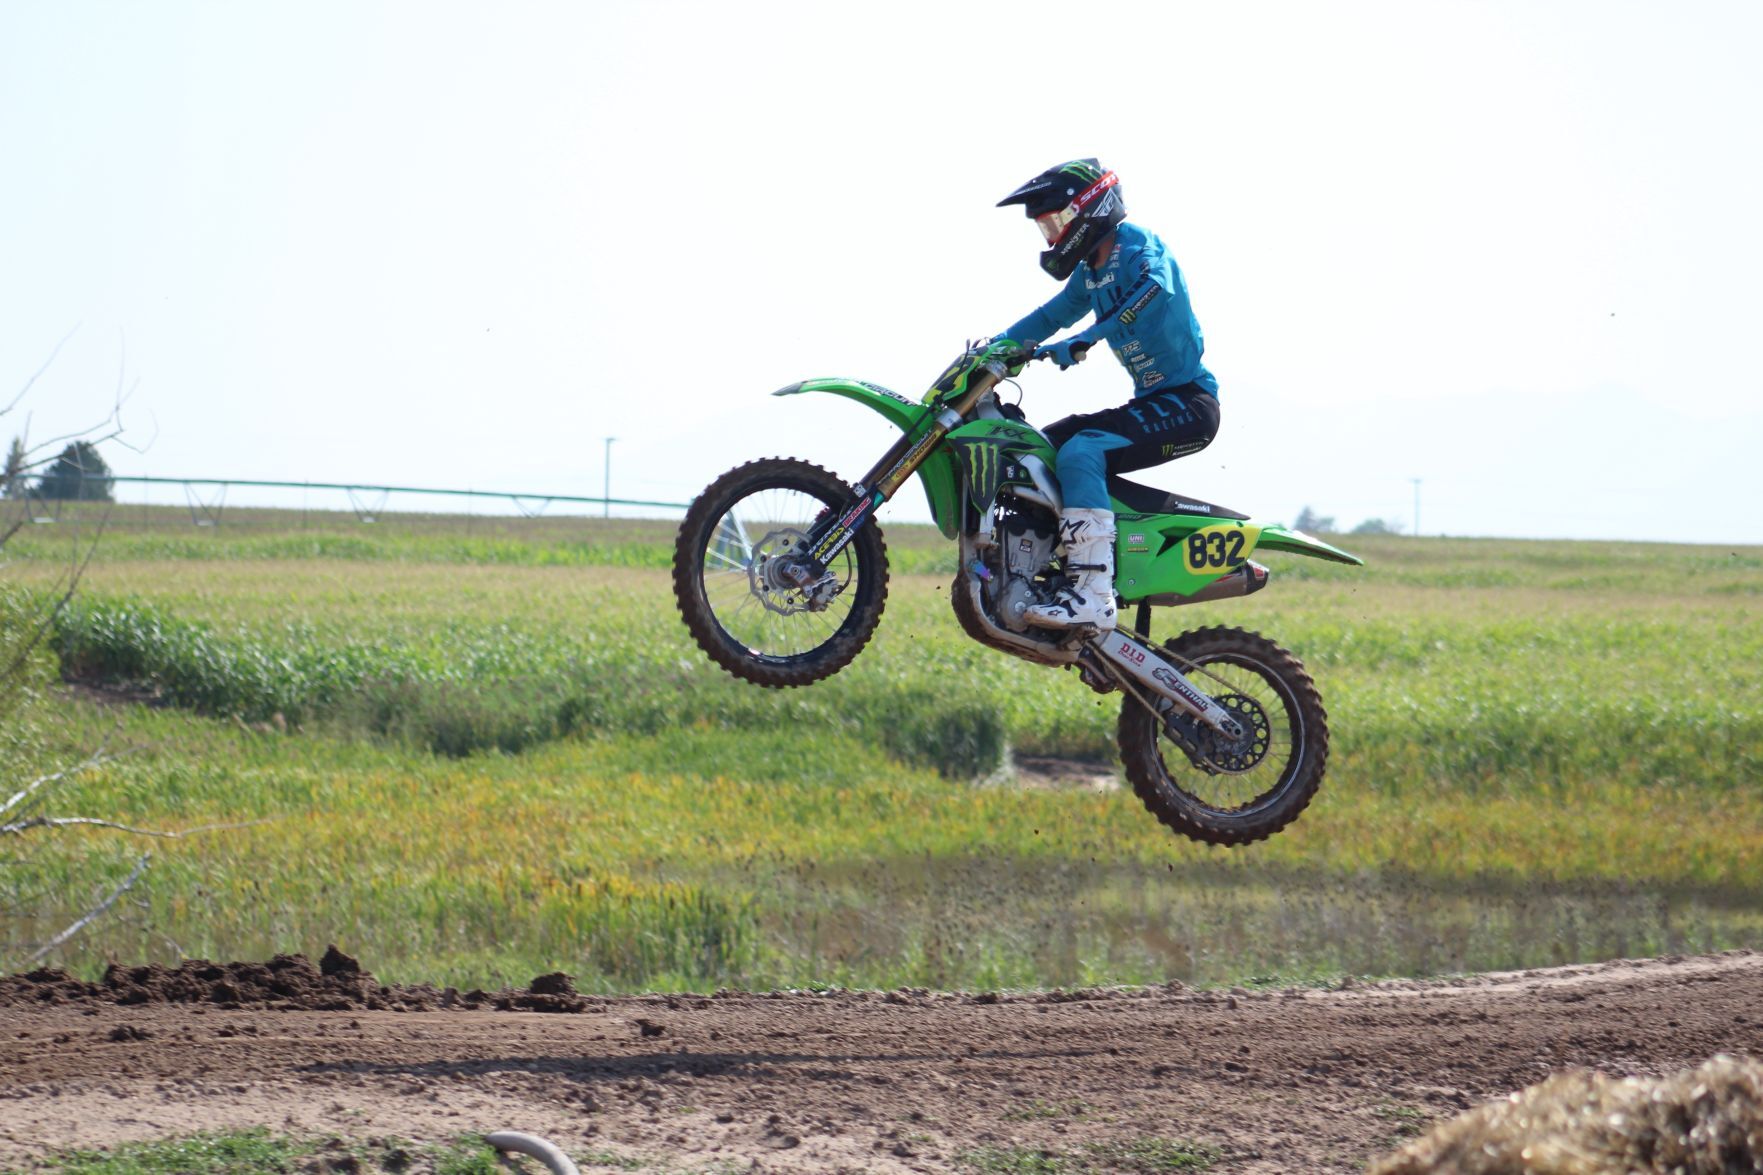 Fairviews field of dreams helped put Idaho on motocross map Local News hjnews pic